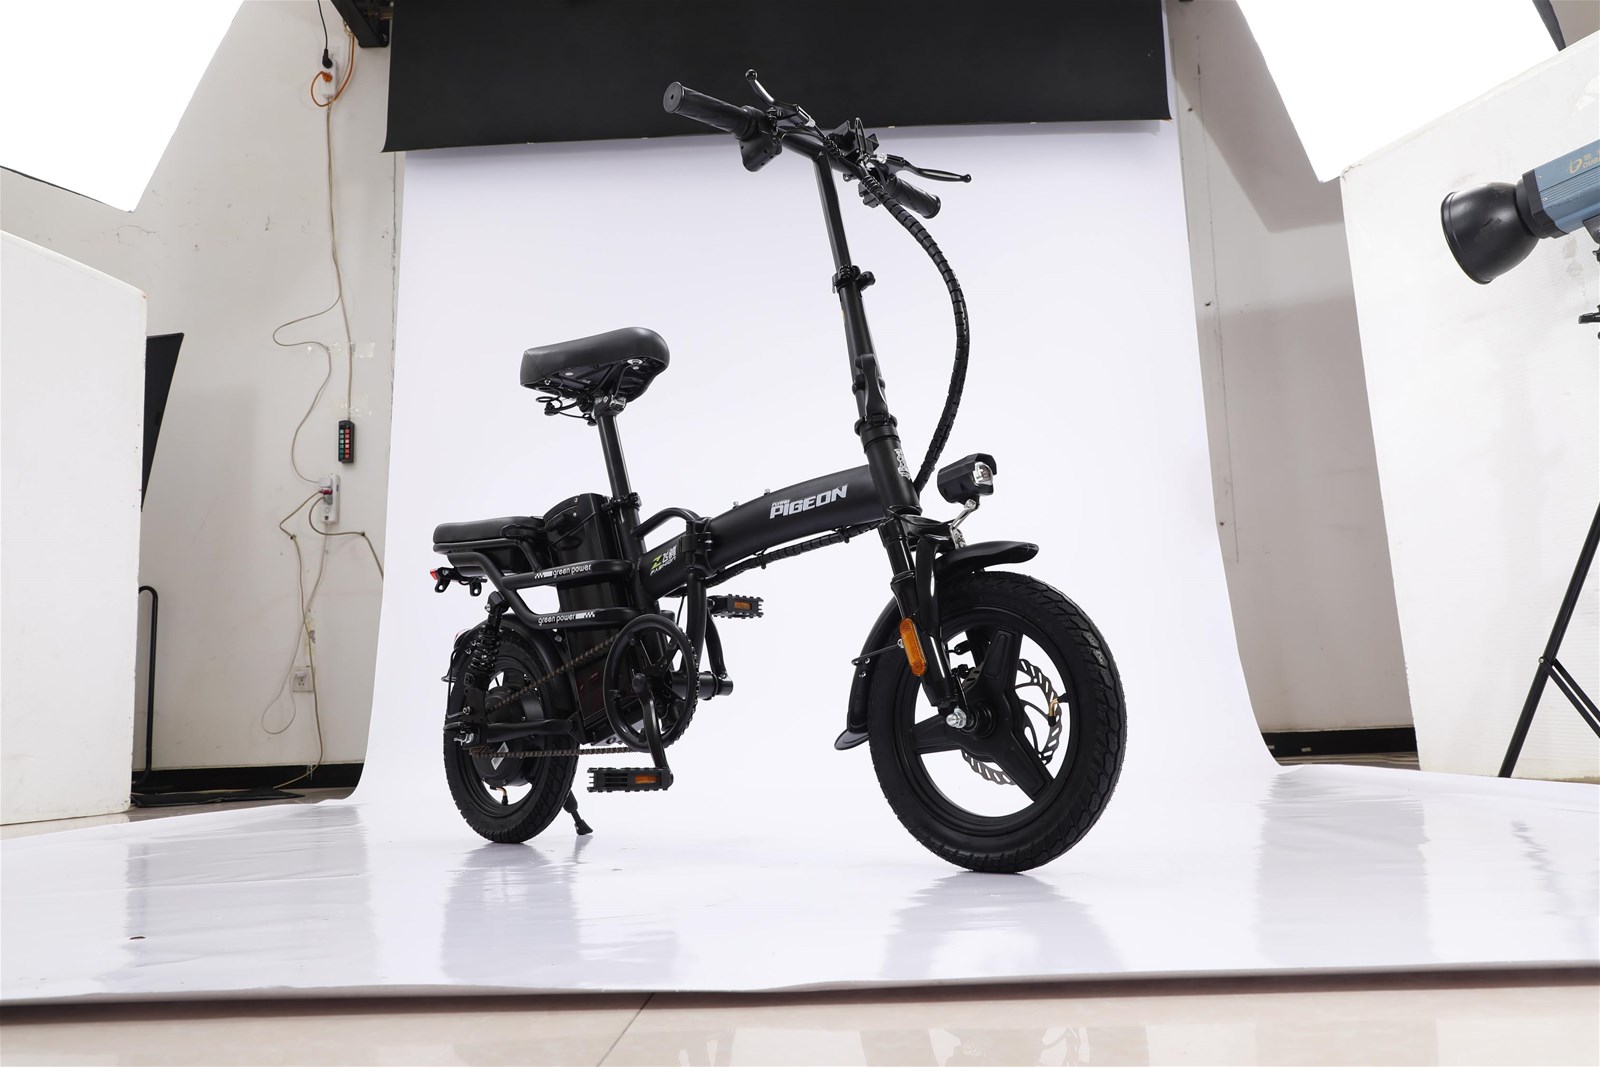 2023 New Upgrade 500 W 2 Wheel Electric Folding Bike Other Electric Scooter Adult Lithium Battery E bike